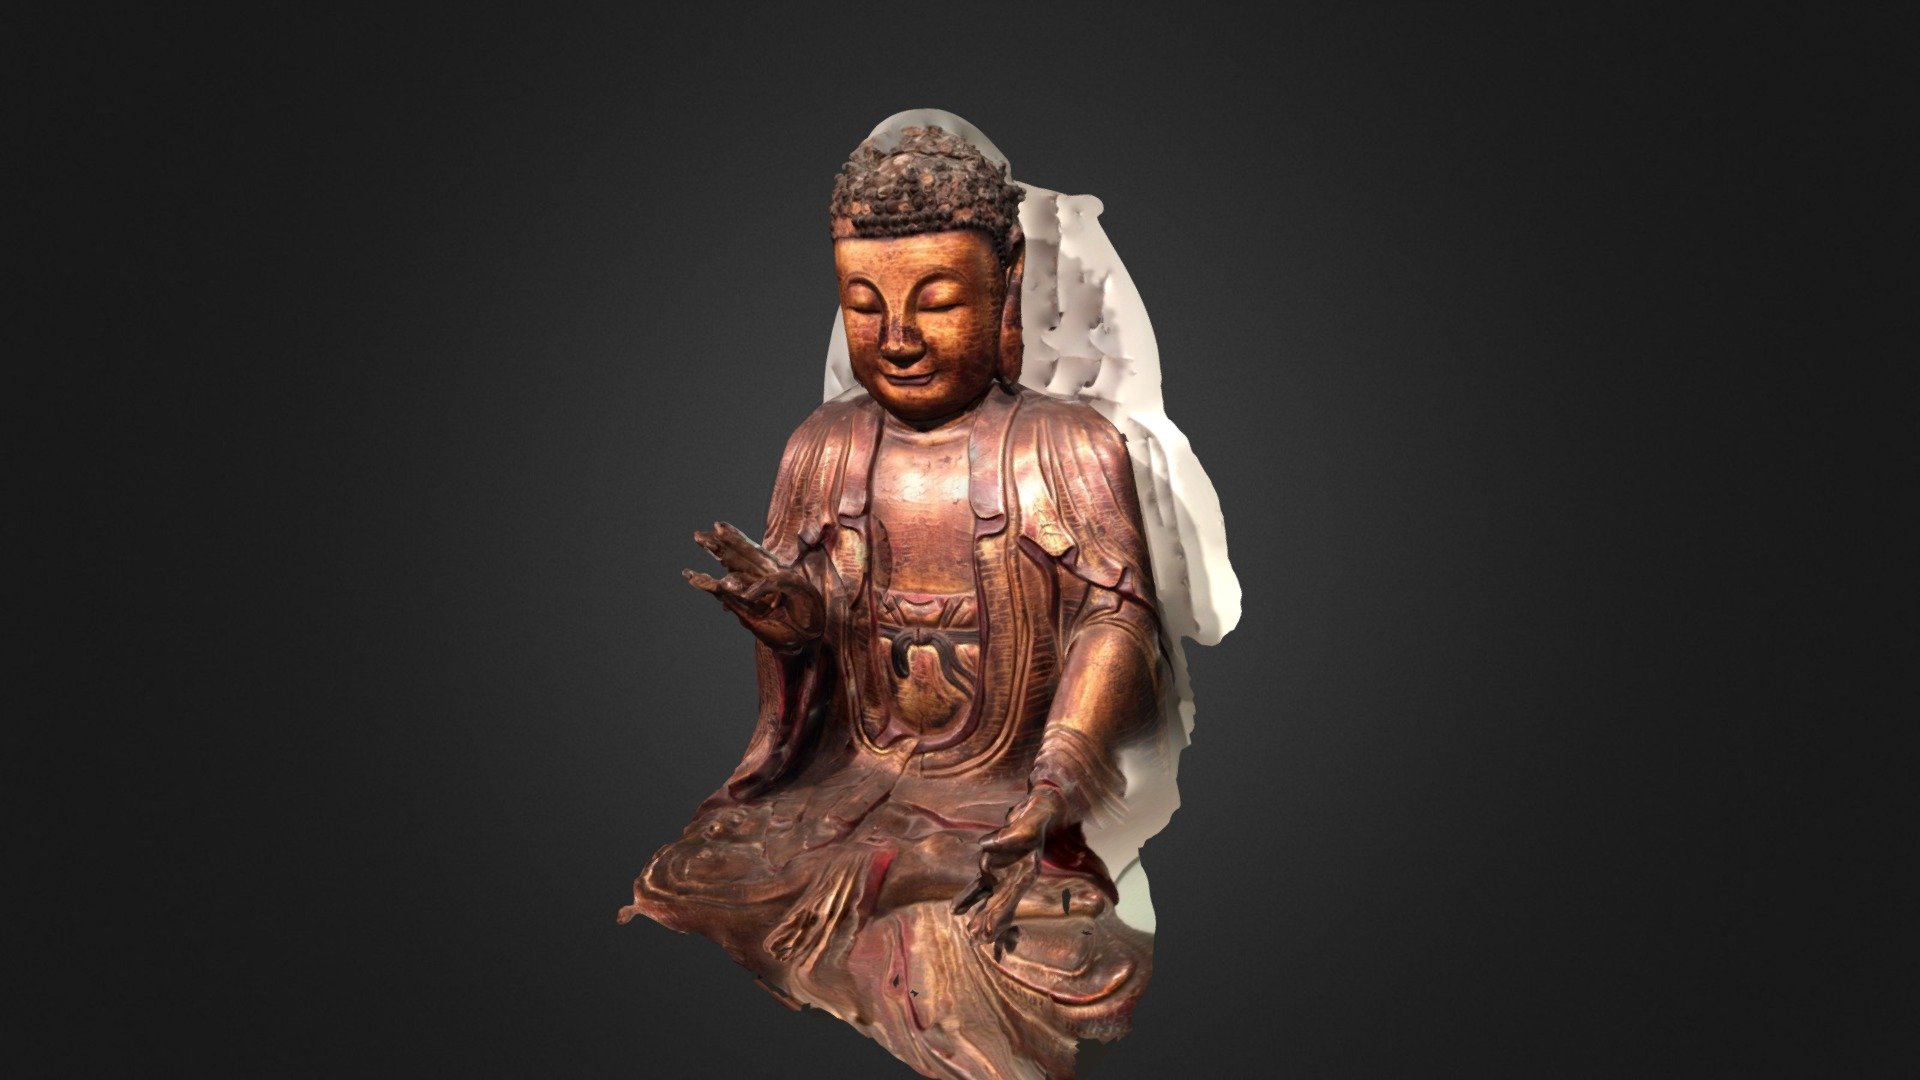 Taken at the SF Asian Art Museum (asianart.org) using the Trnio iPhone app 3d model